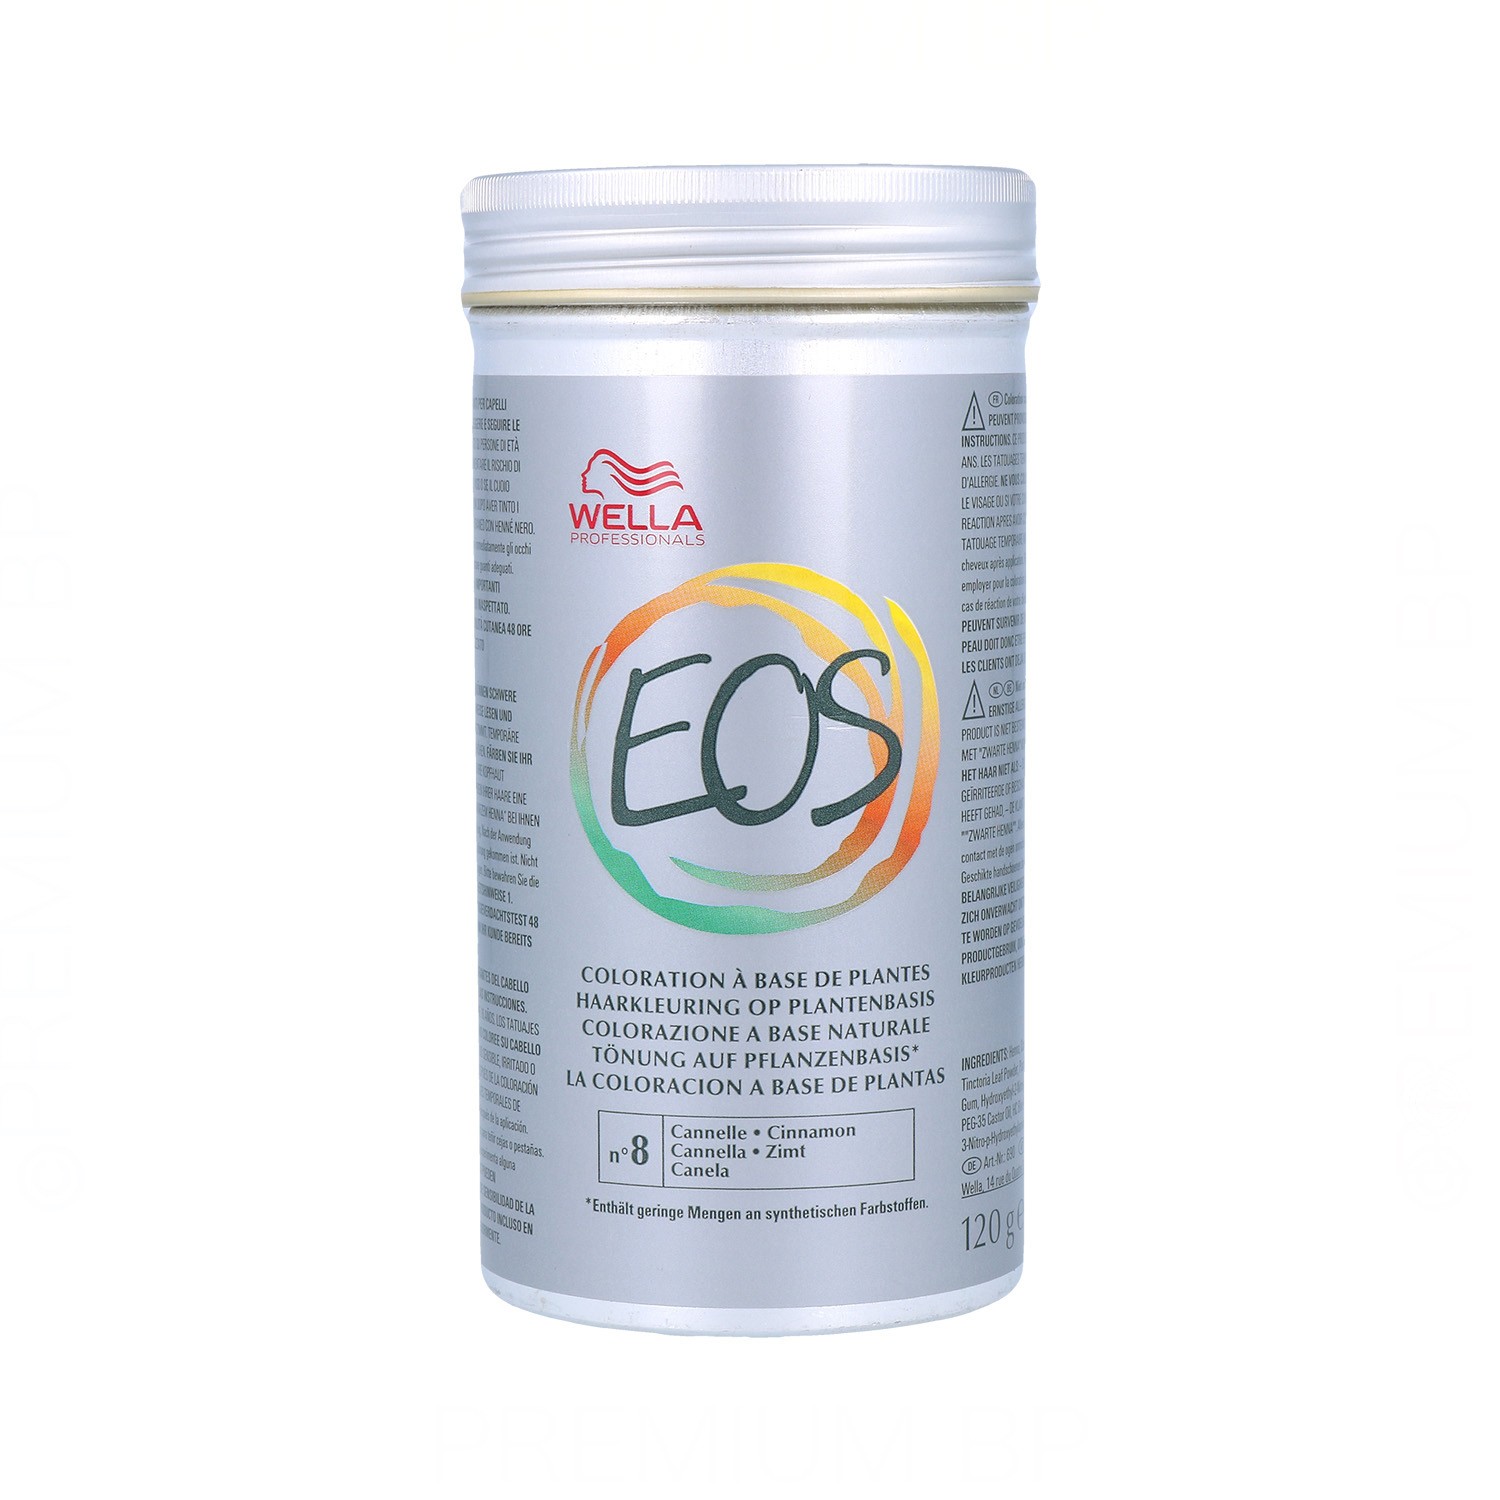 Wella Eos Color 8 Cannelle 120 gr